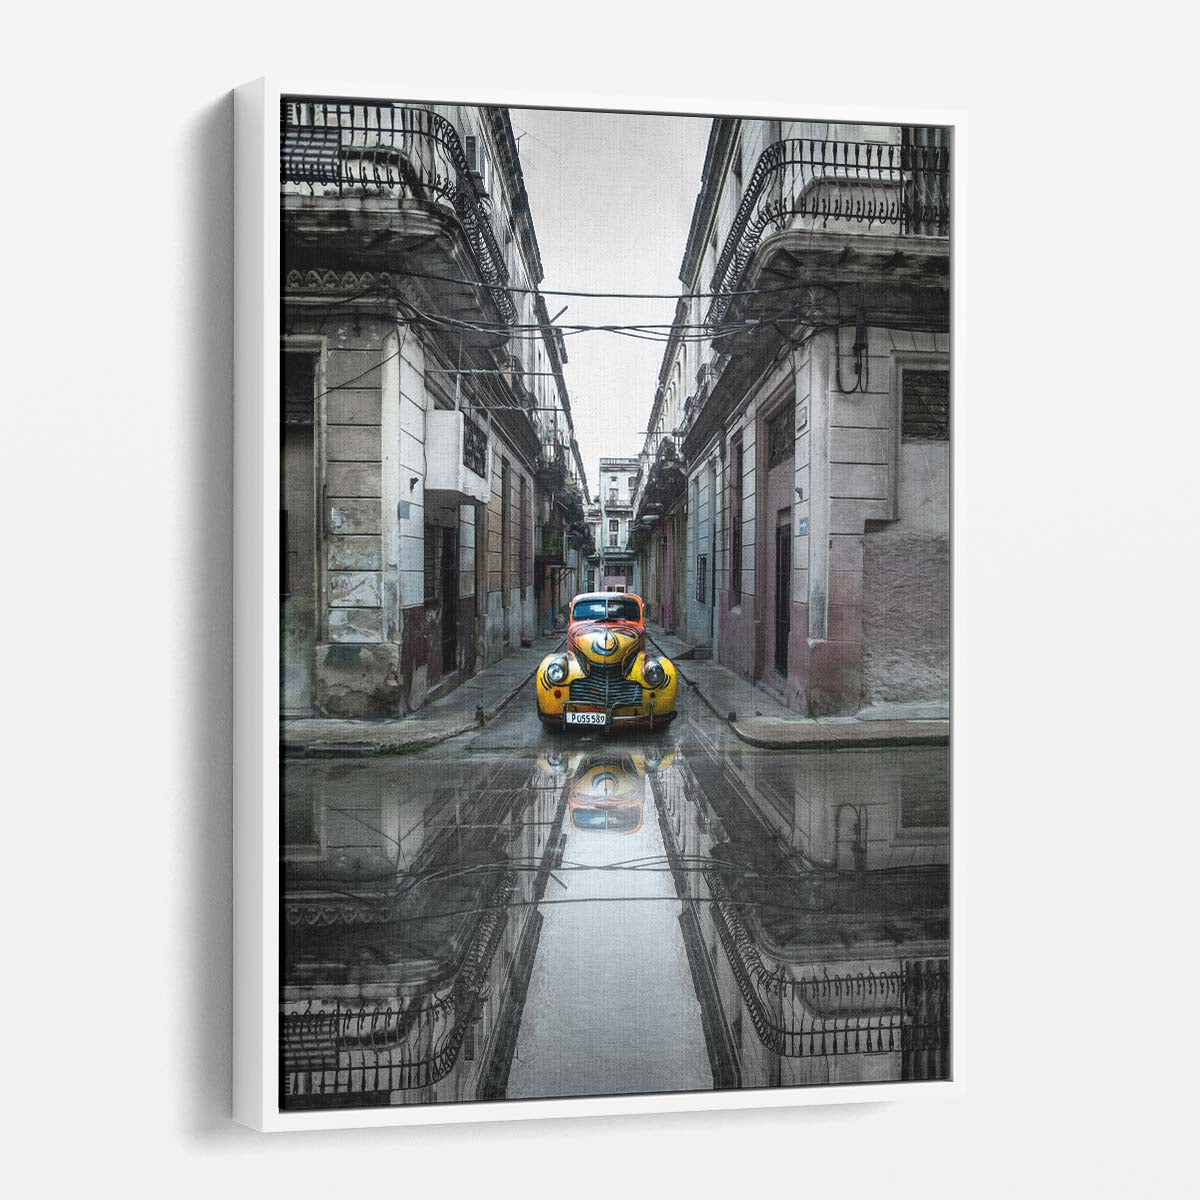 Vintage American Classic Car Street Photography, Havana Cuba by Luxuriance Designs, made in USA